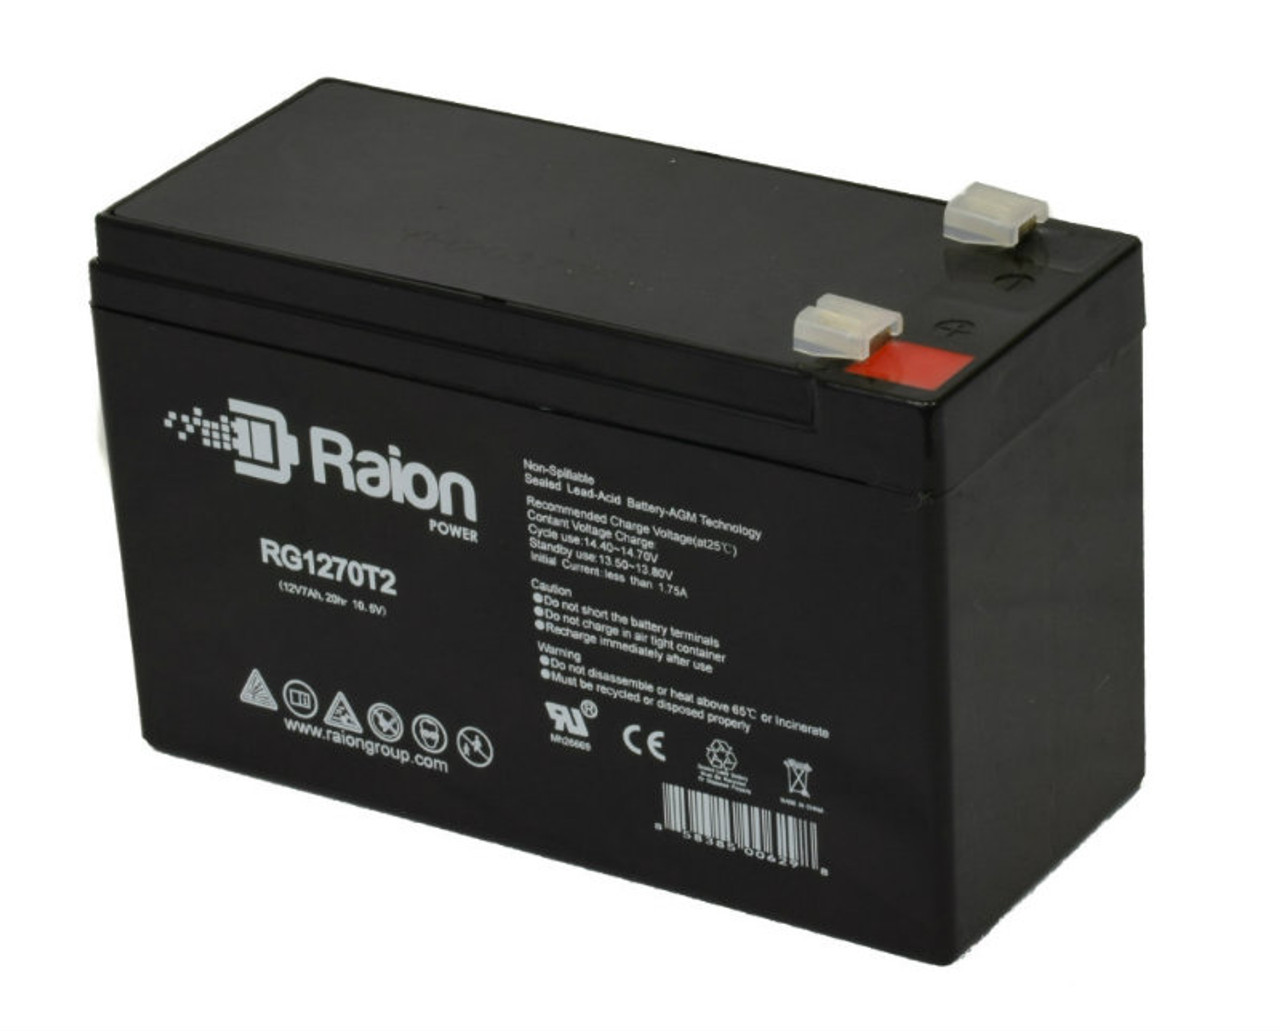 Raion Power RG1270T1 12V 7Ah Non-Spillable Replacement Battery for RPower GIV1270V F1